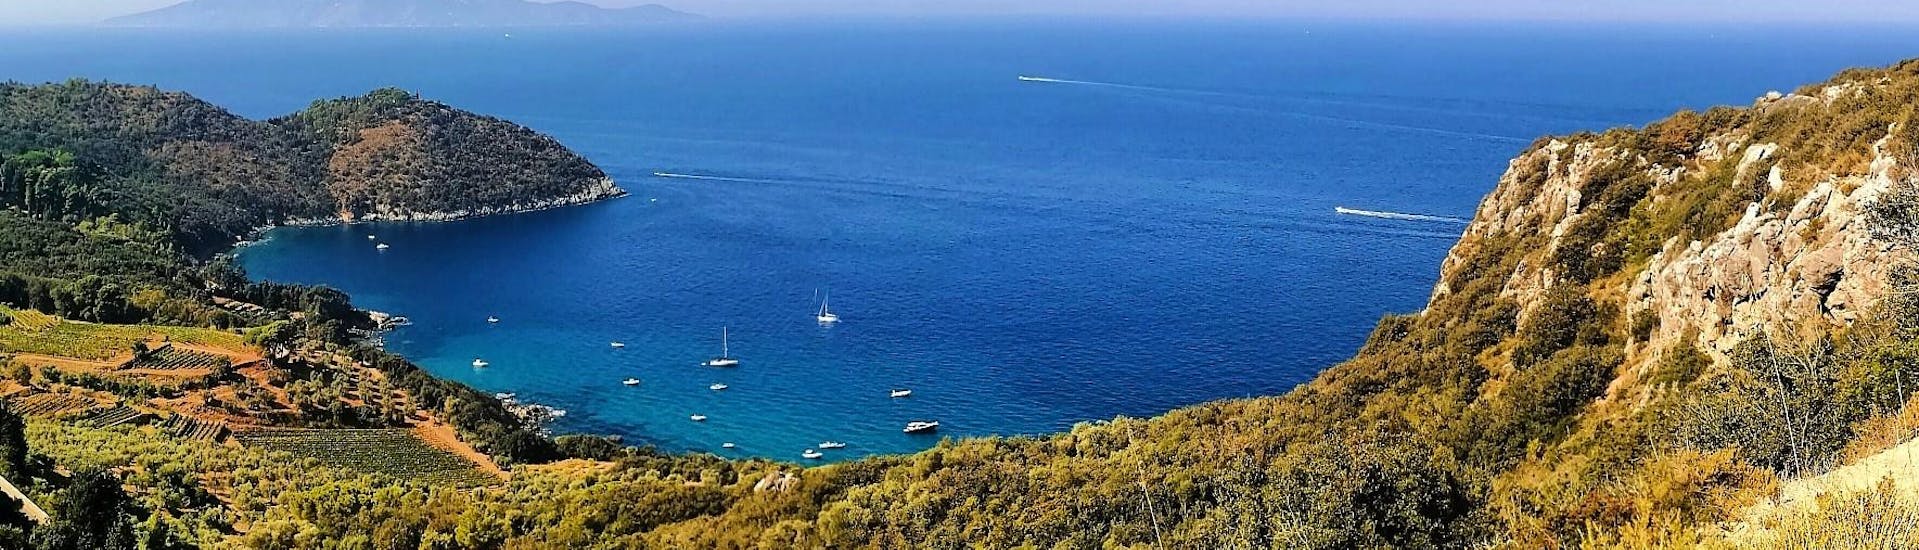 Photo of the wonderful landscape of Monte Argentario during a trip with Bike & Boat Argentario.